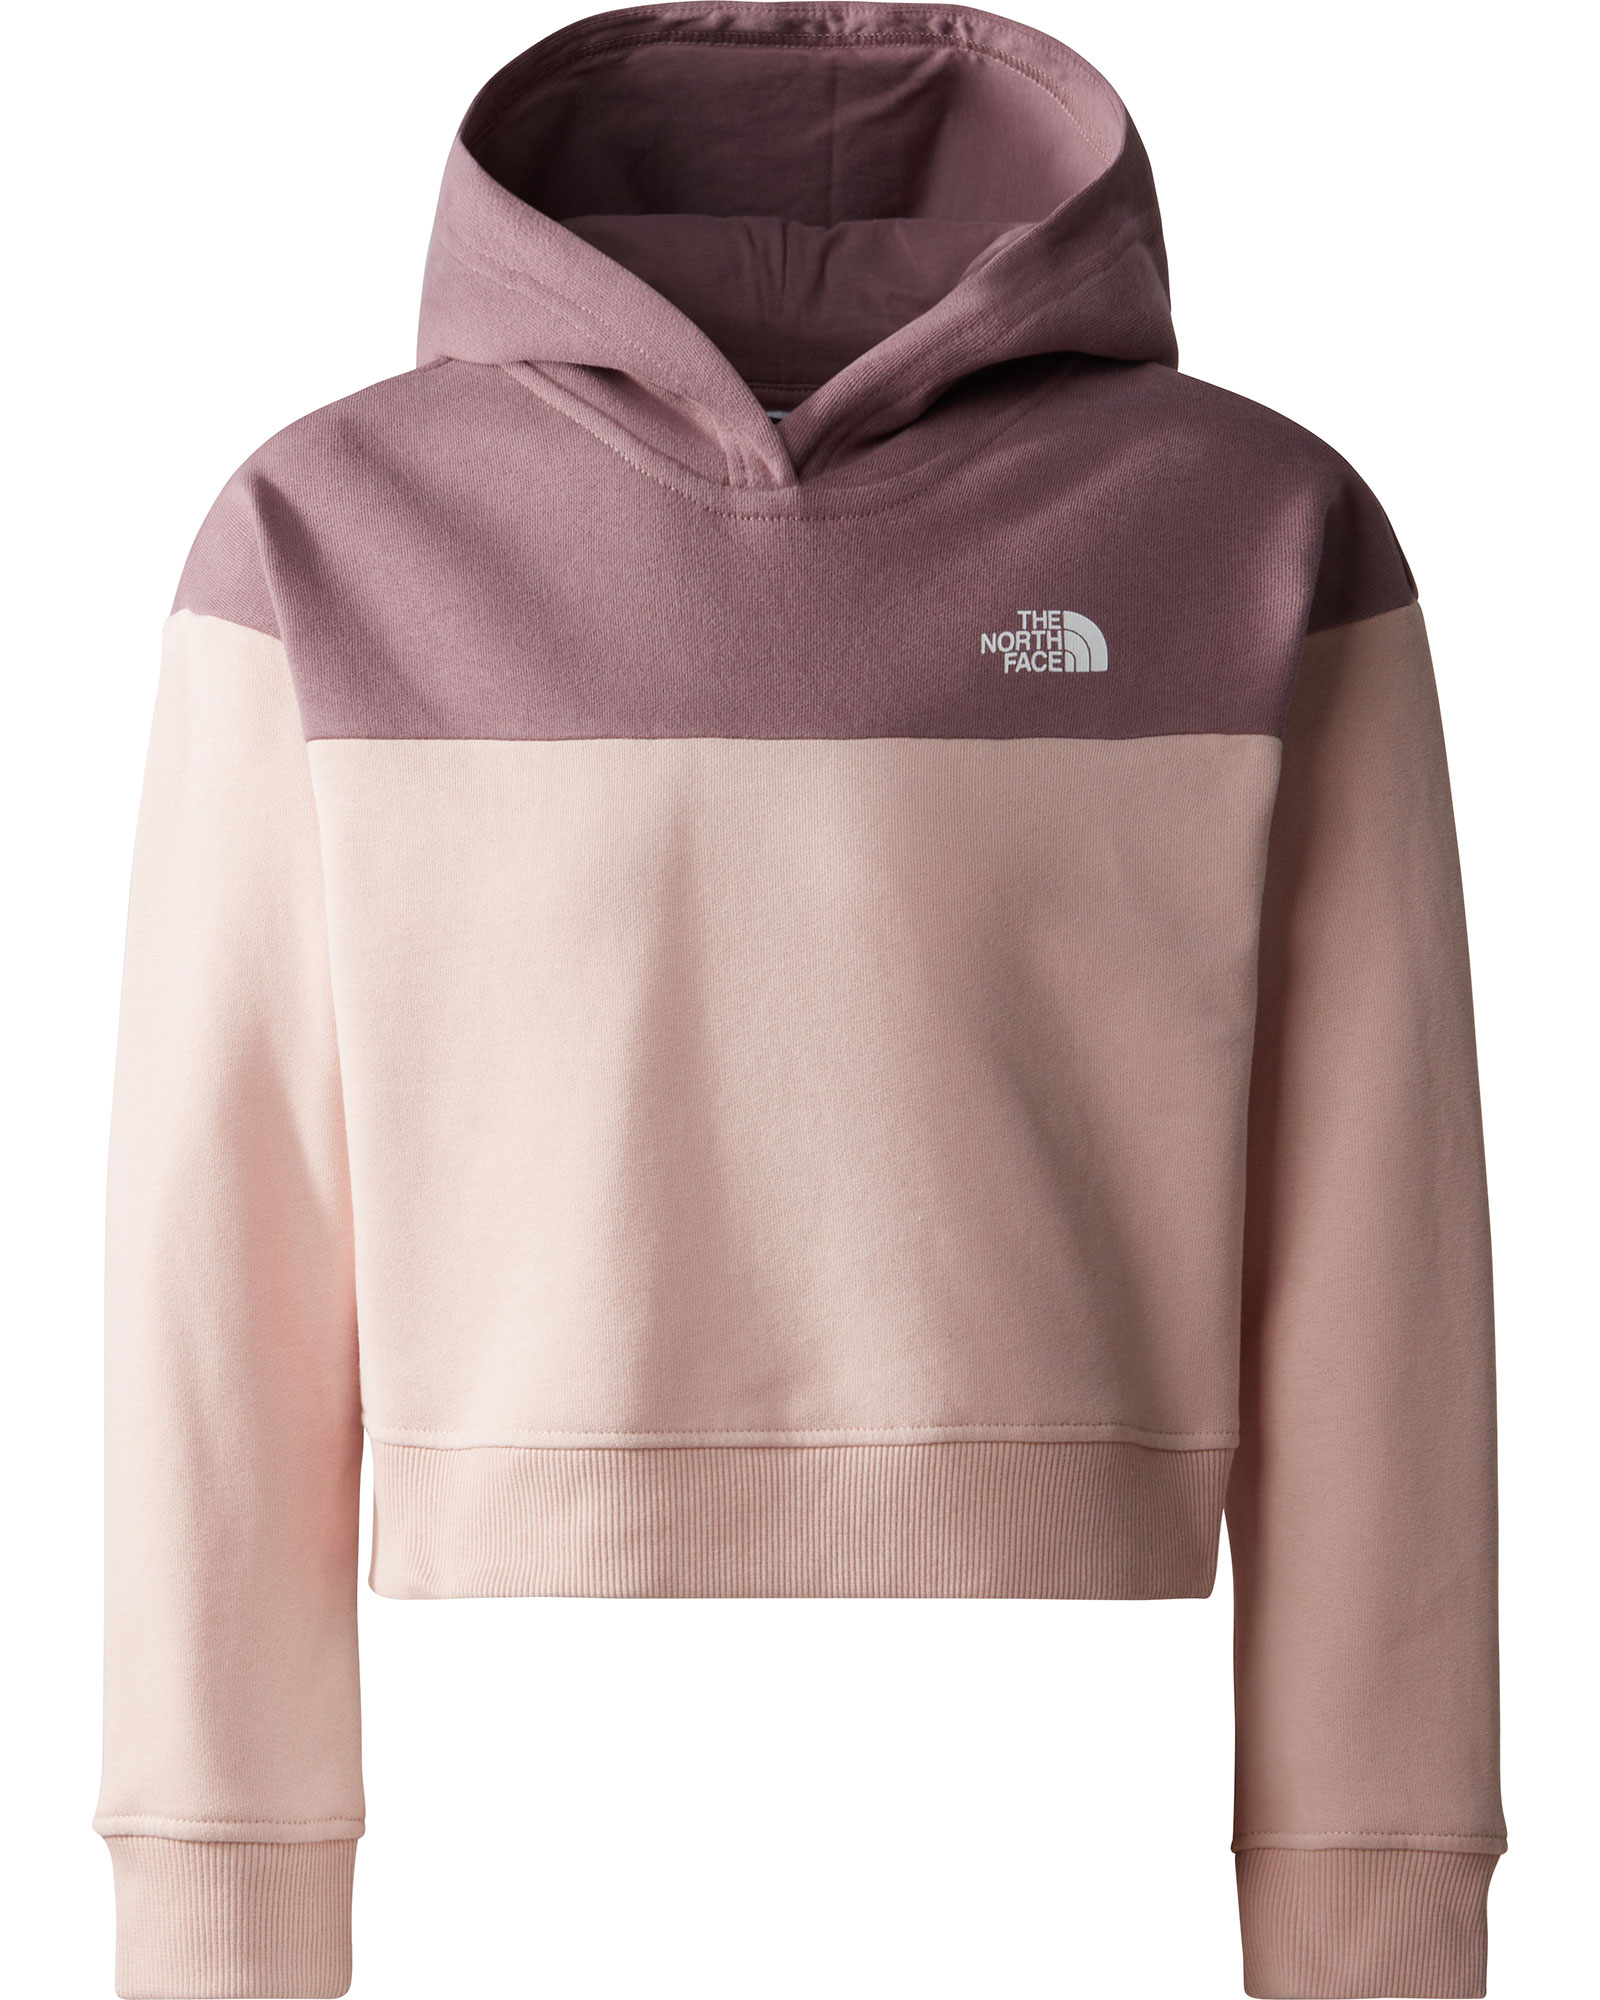 The North Face Girl’s Drew Peak Crop P/O Hoodie - Pink Moss-Fawn Grey M